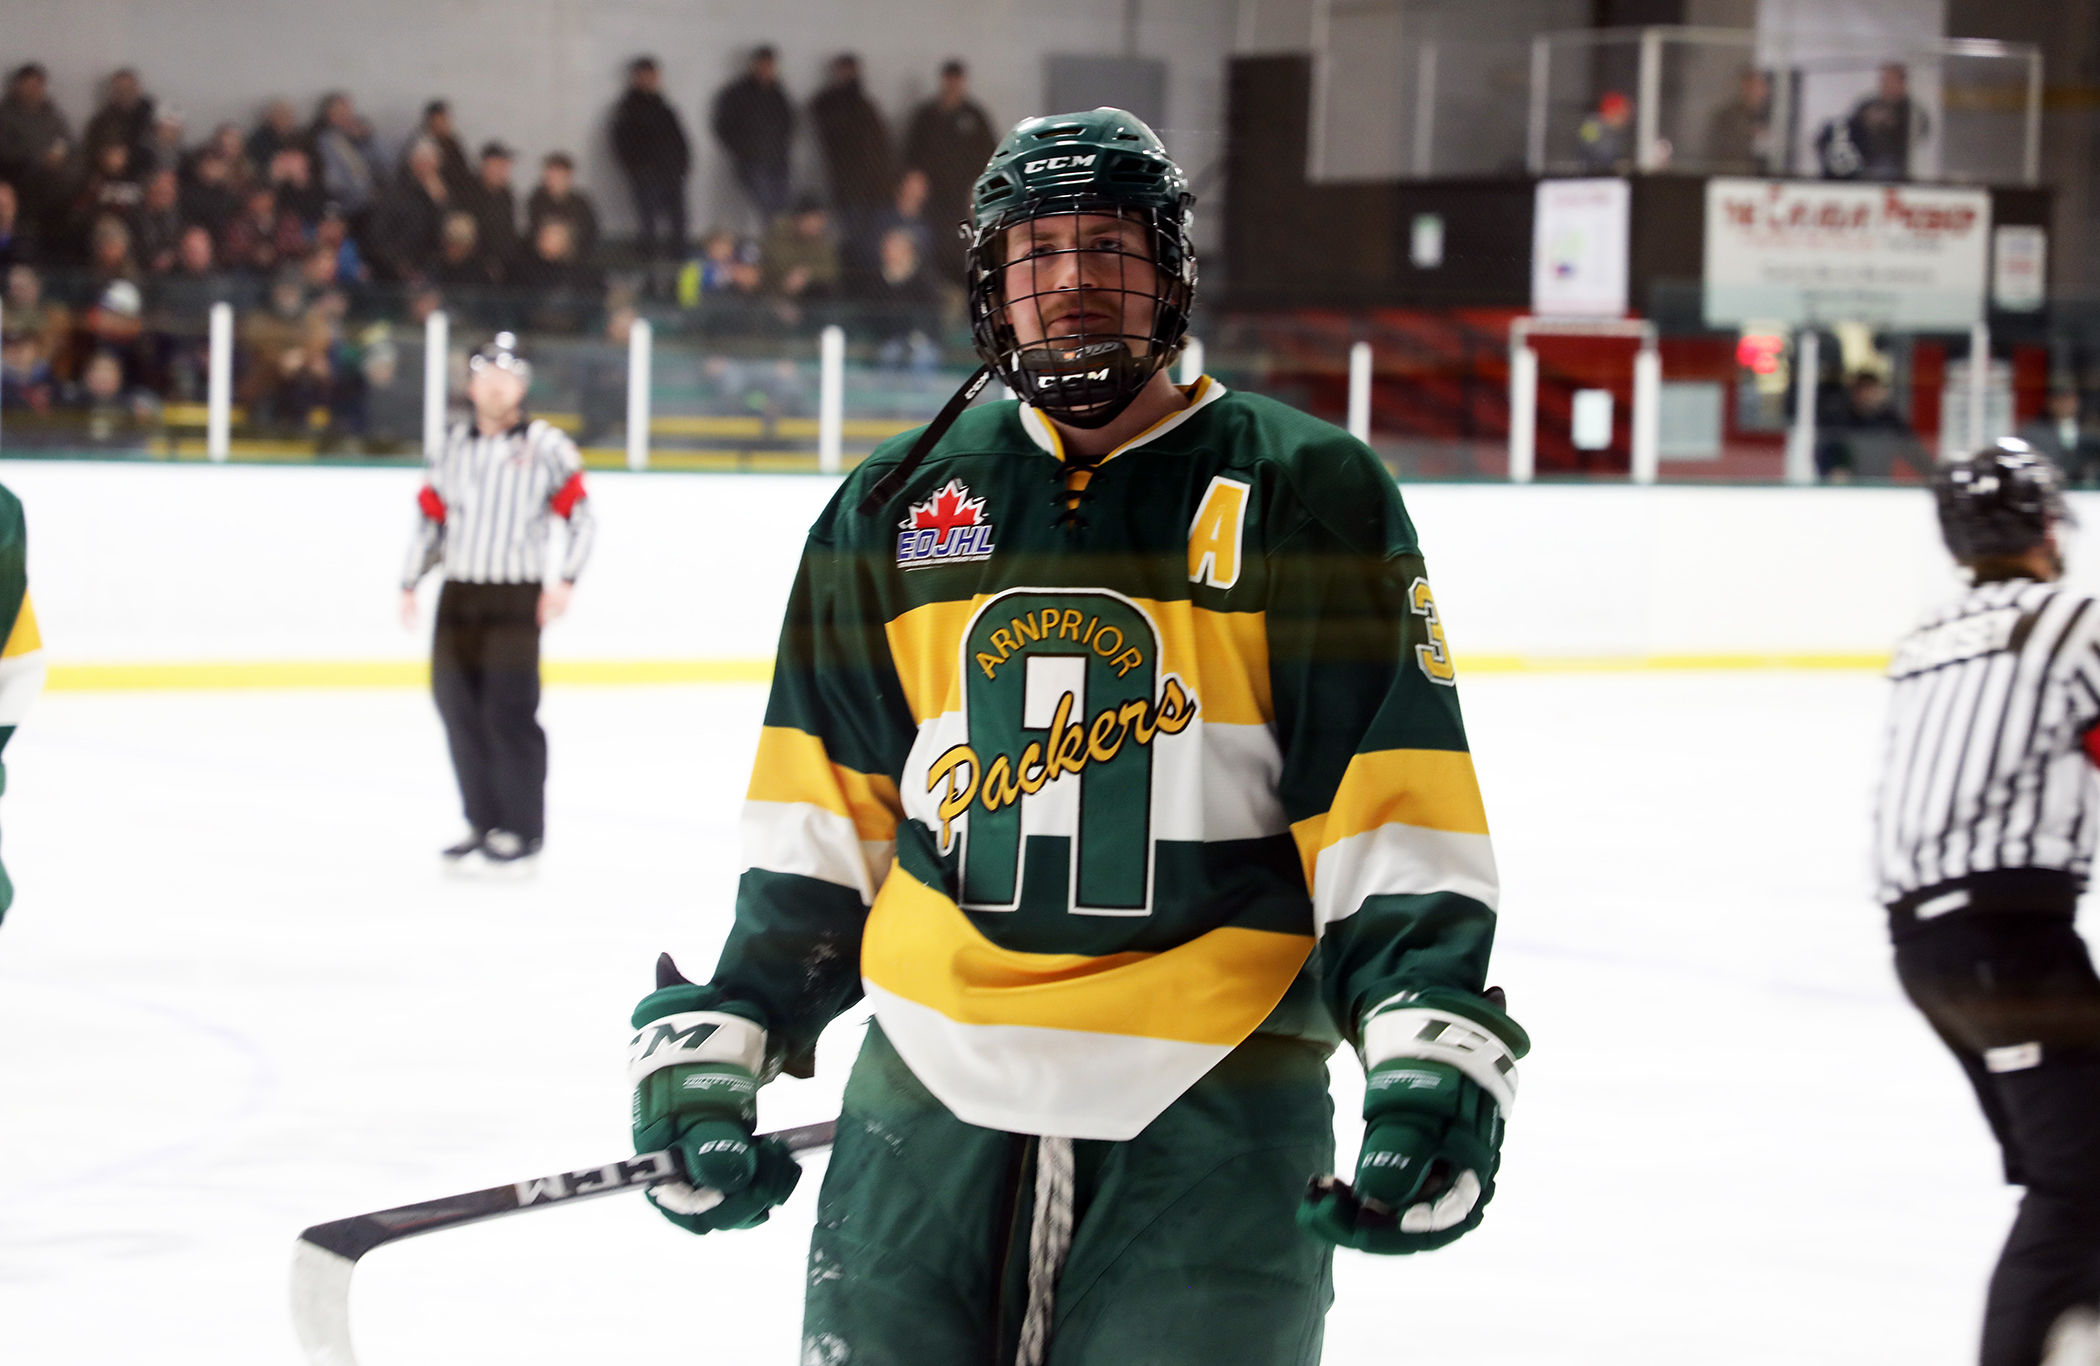 Arnprior Packers not done by a long shot